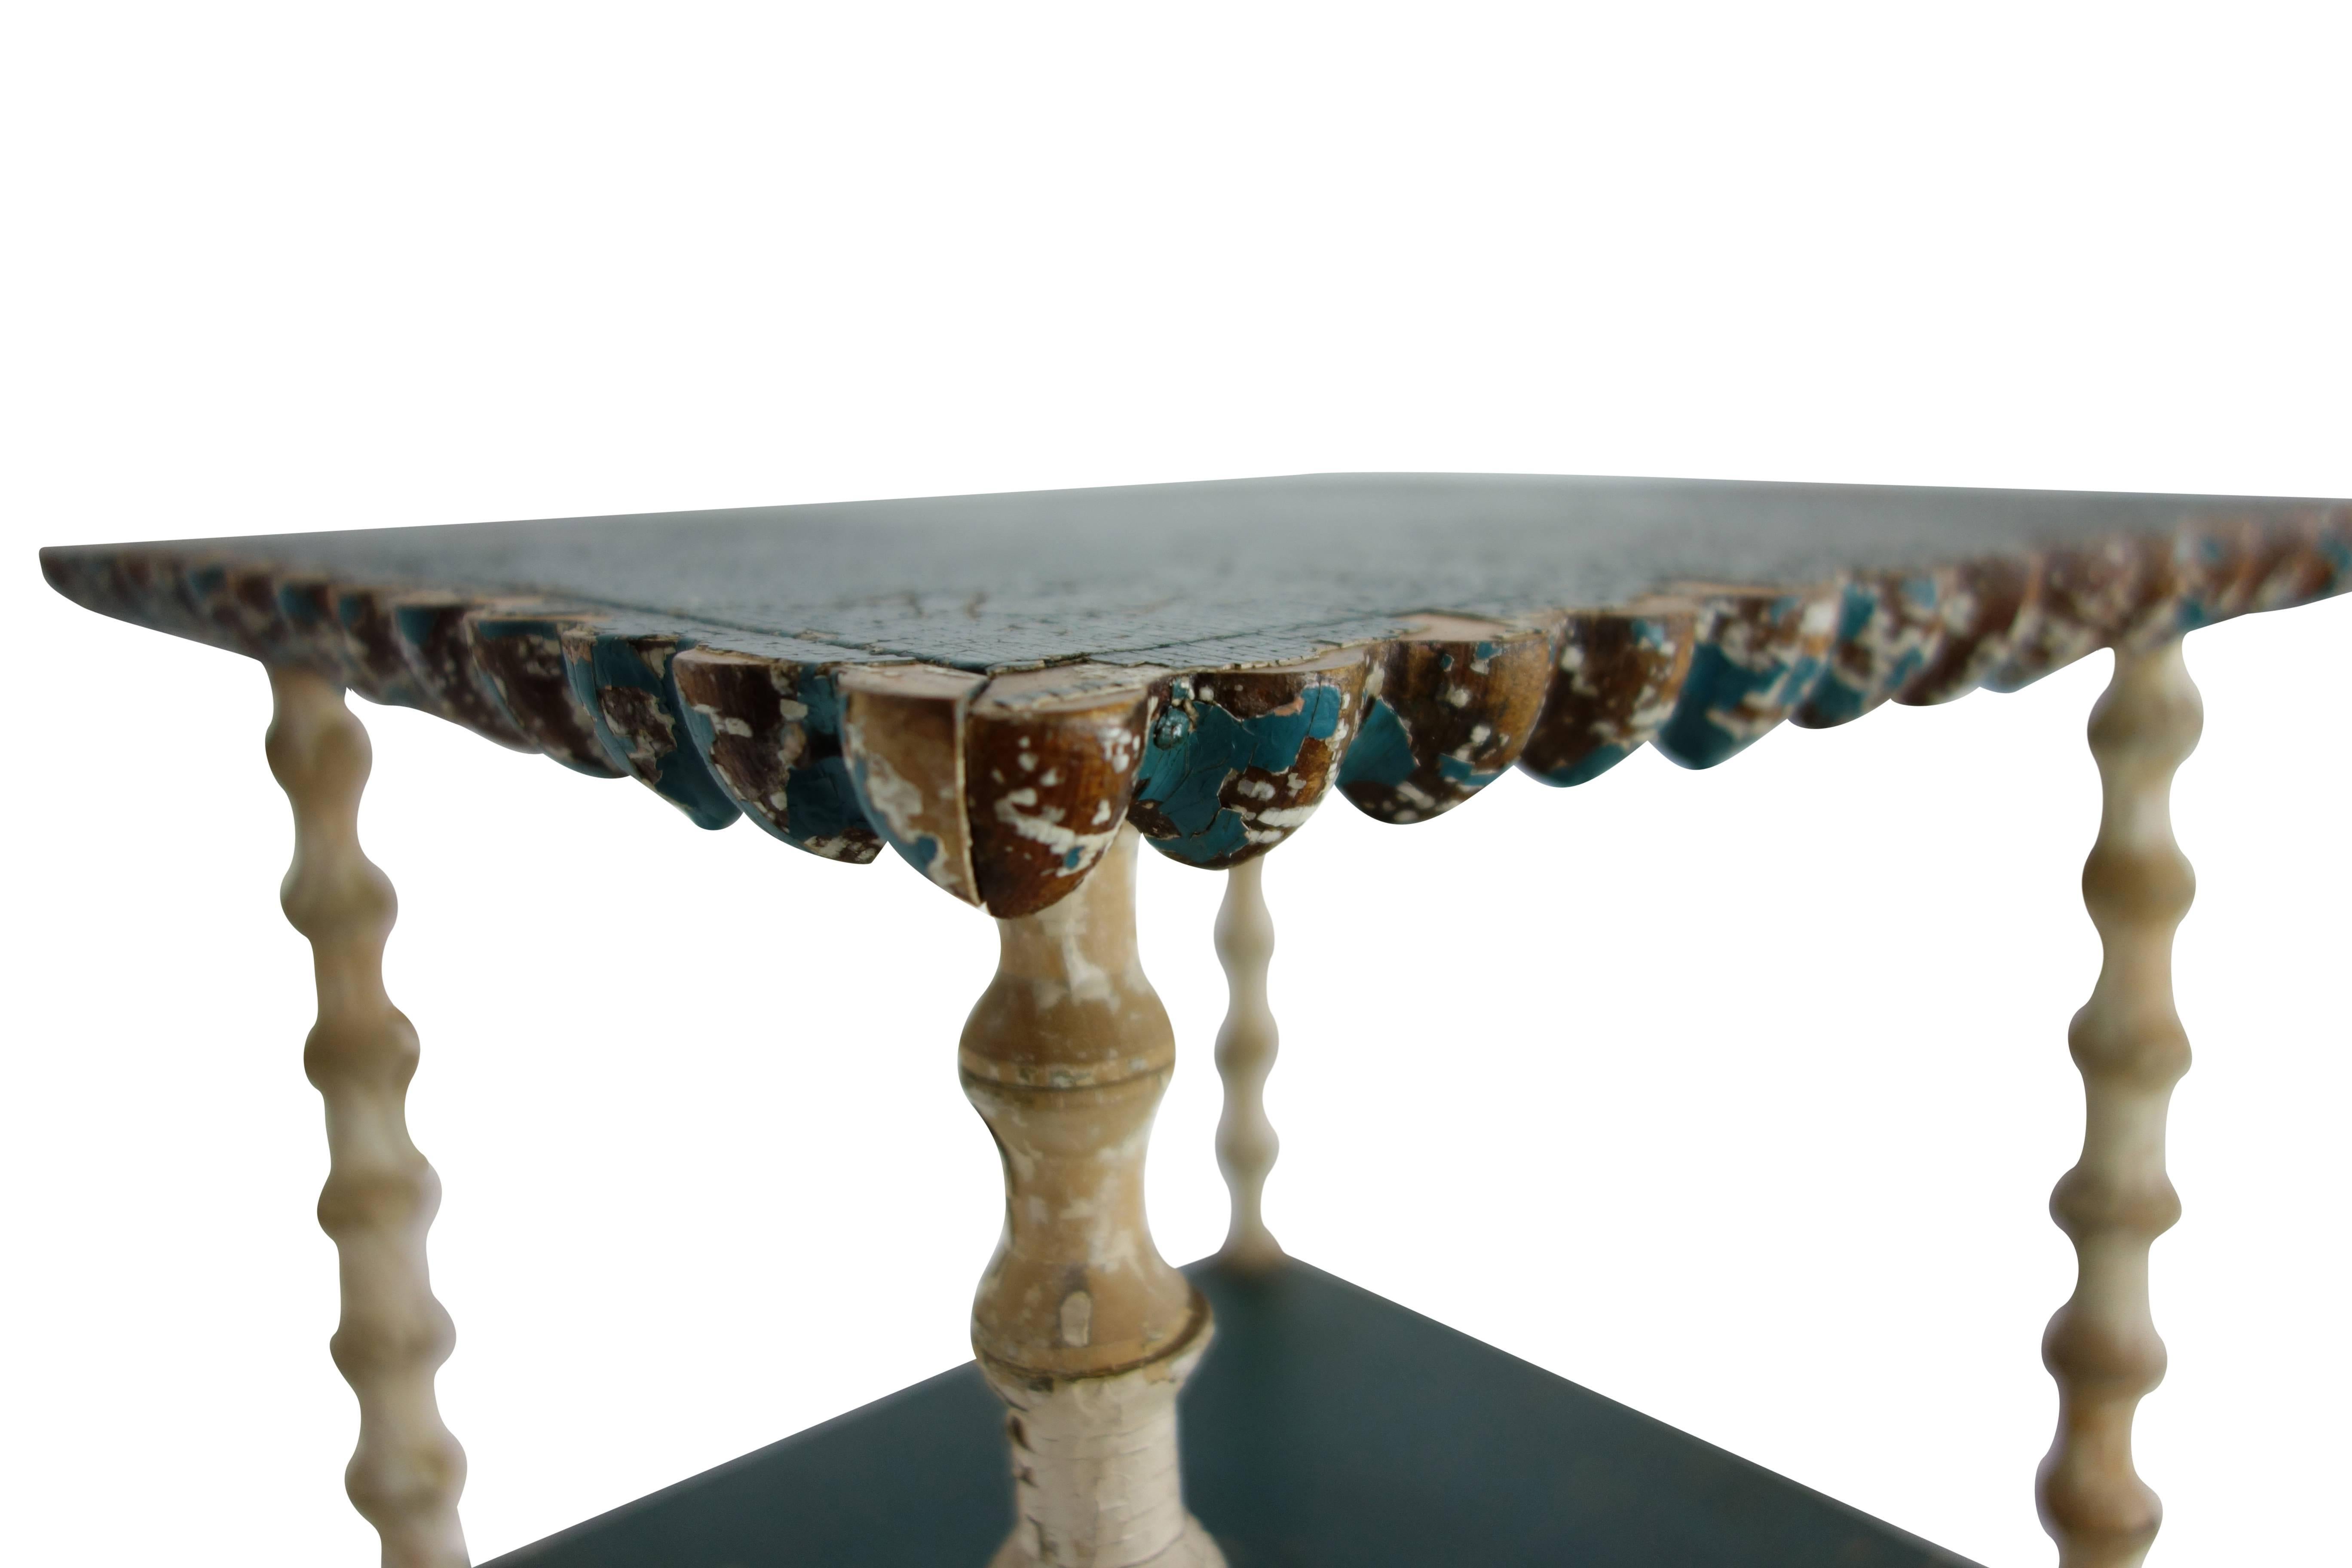 Wood Painted Three-Tiered Spool Side Table with Turtle on Underside, Dated 1895